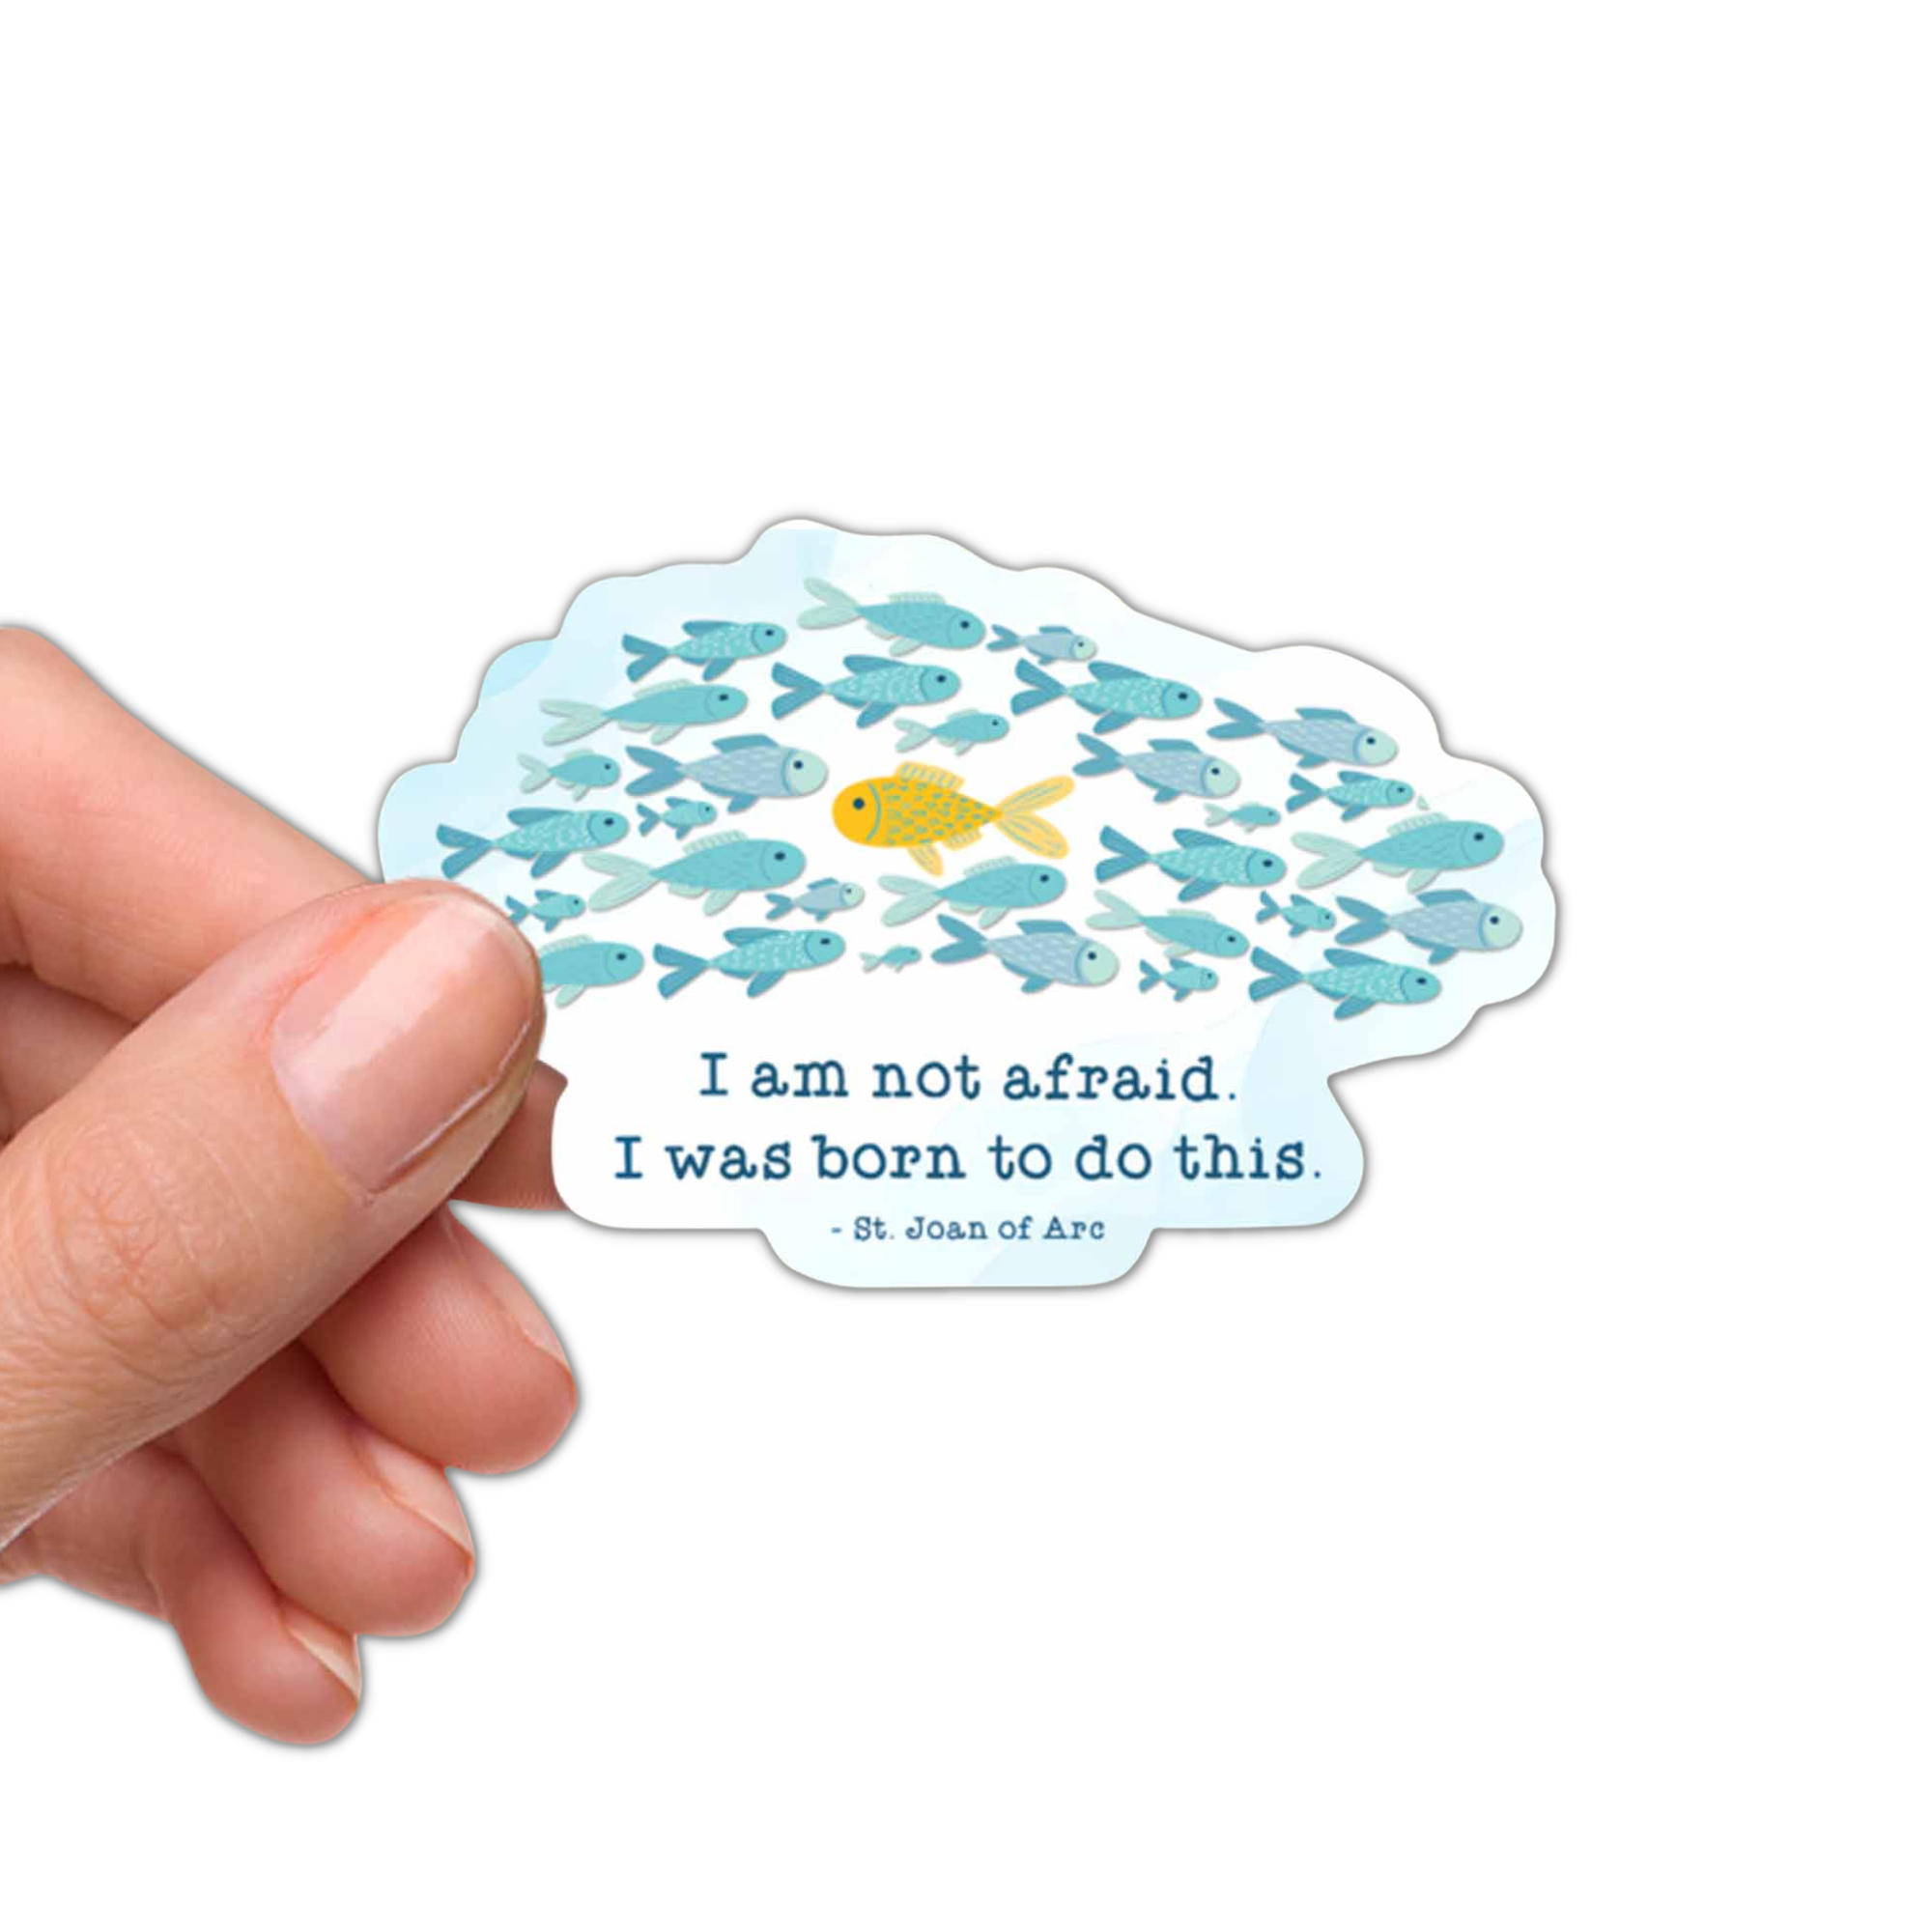 St Joan of Arc "I was born to do this" Vinyl Waterproof Sticker